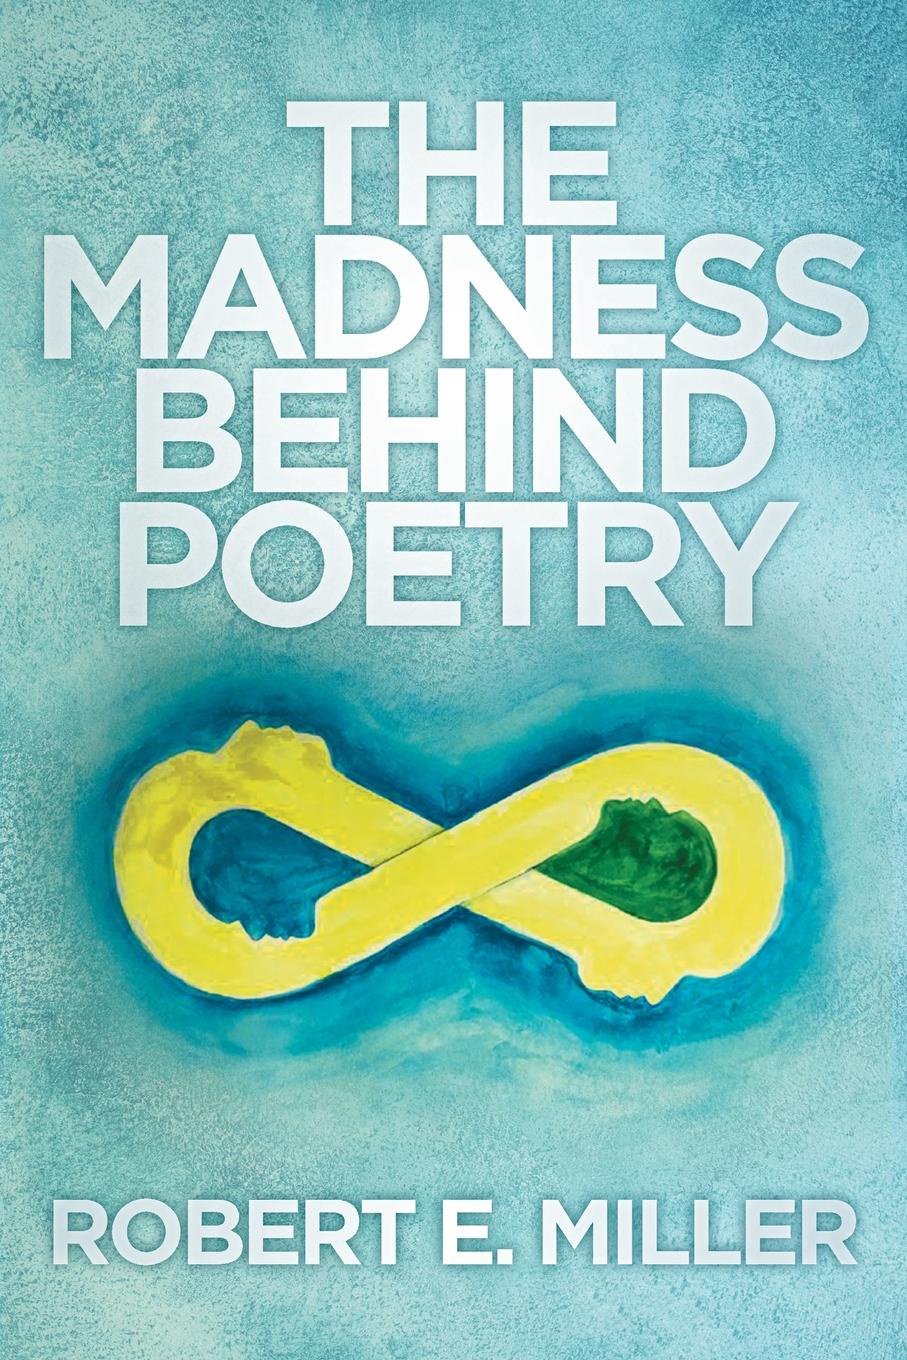 The Madness behind Poetry